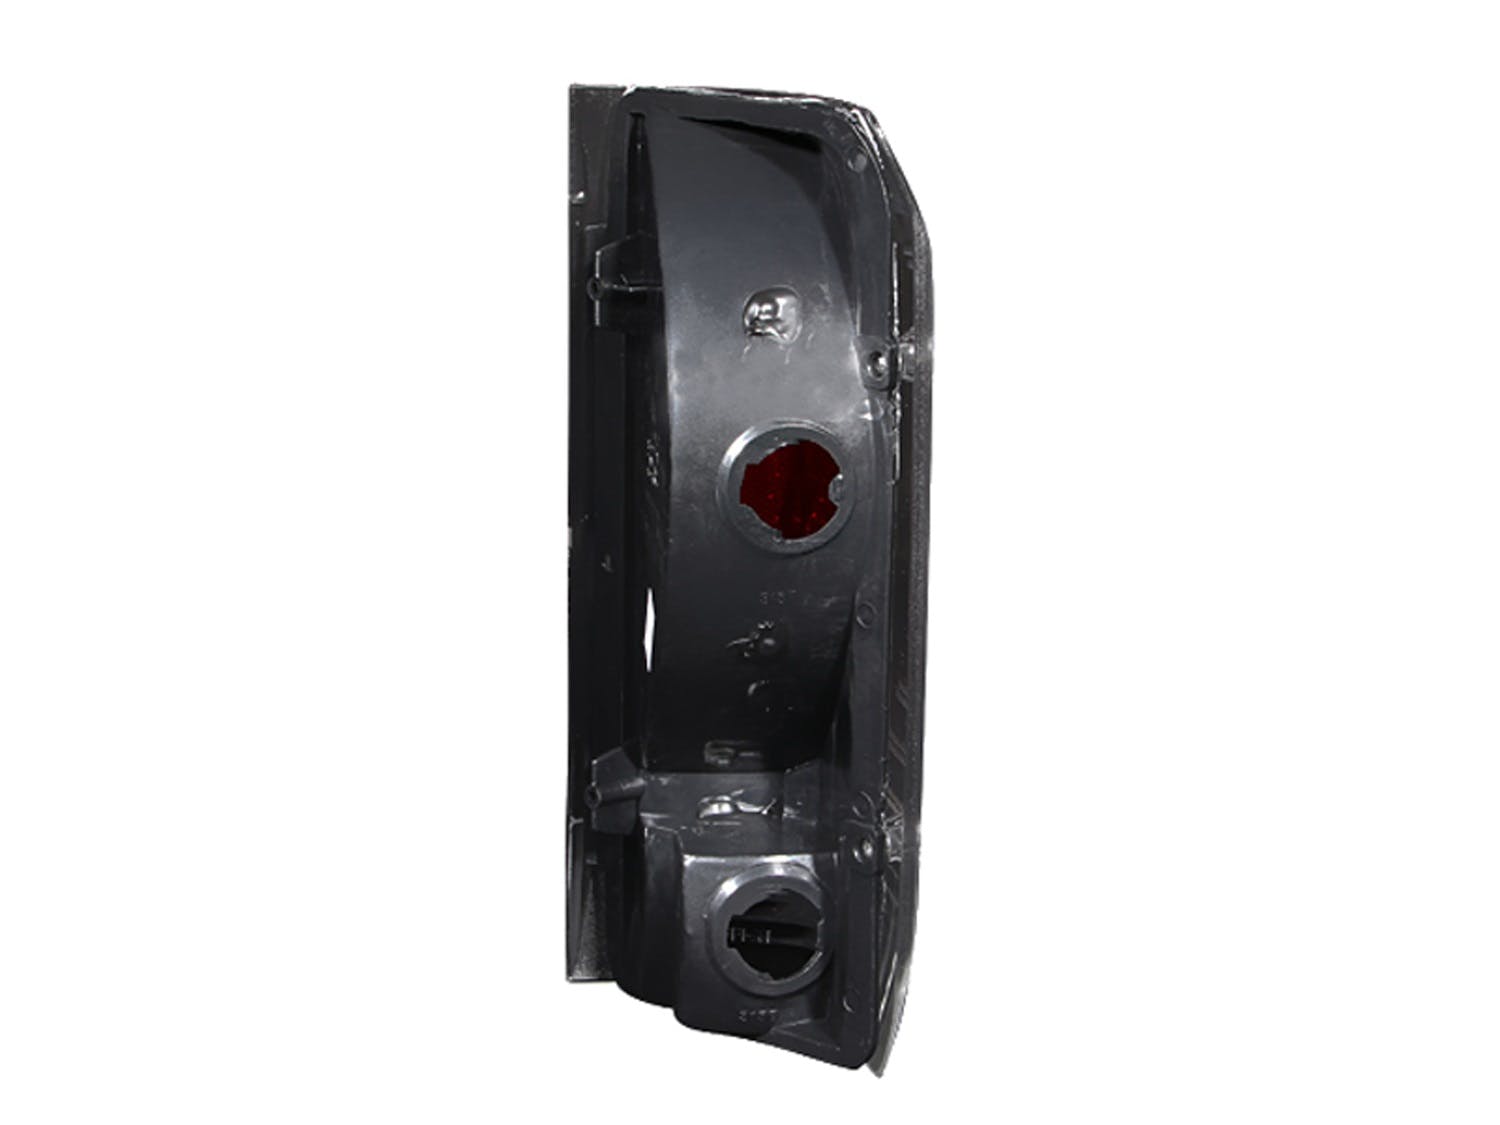 AnzoUSA 211062 Taillights Black